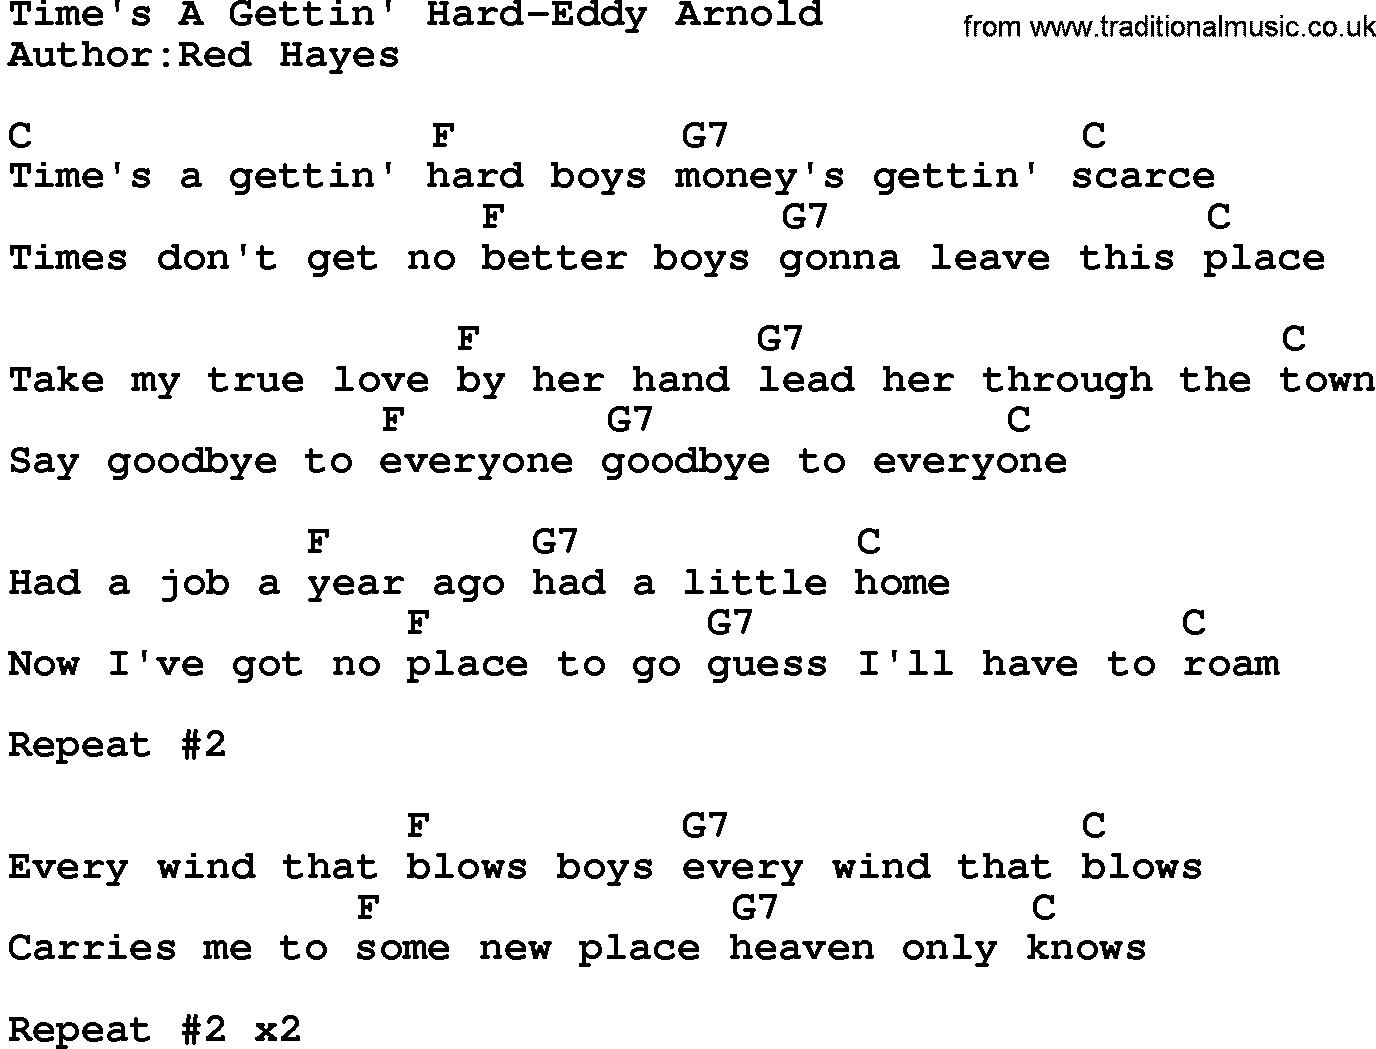 Country music song: Time's A Gettin' Hard-Eddy Arnold lyrics and chords